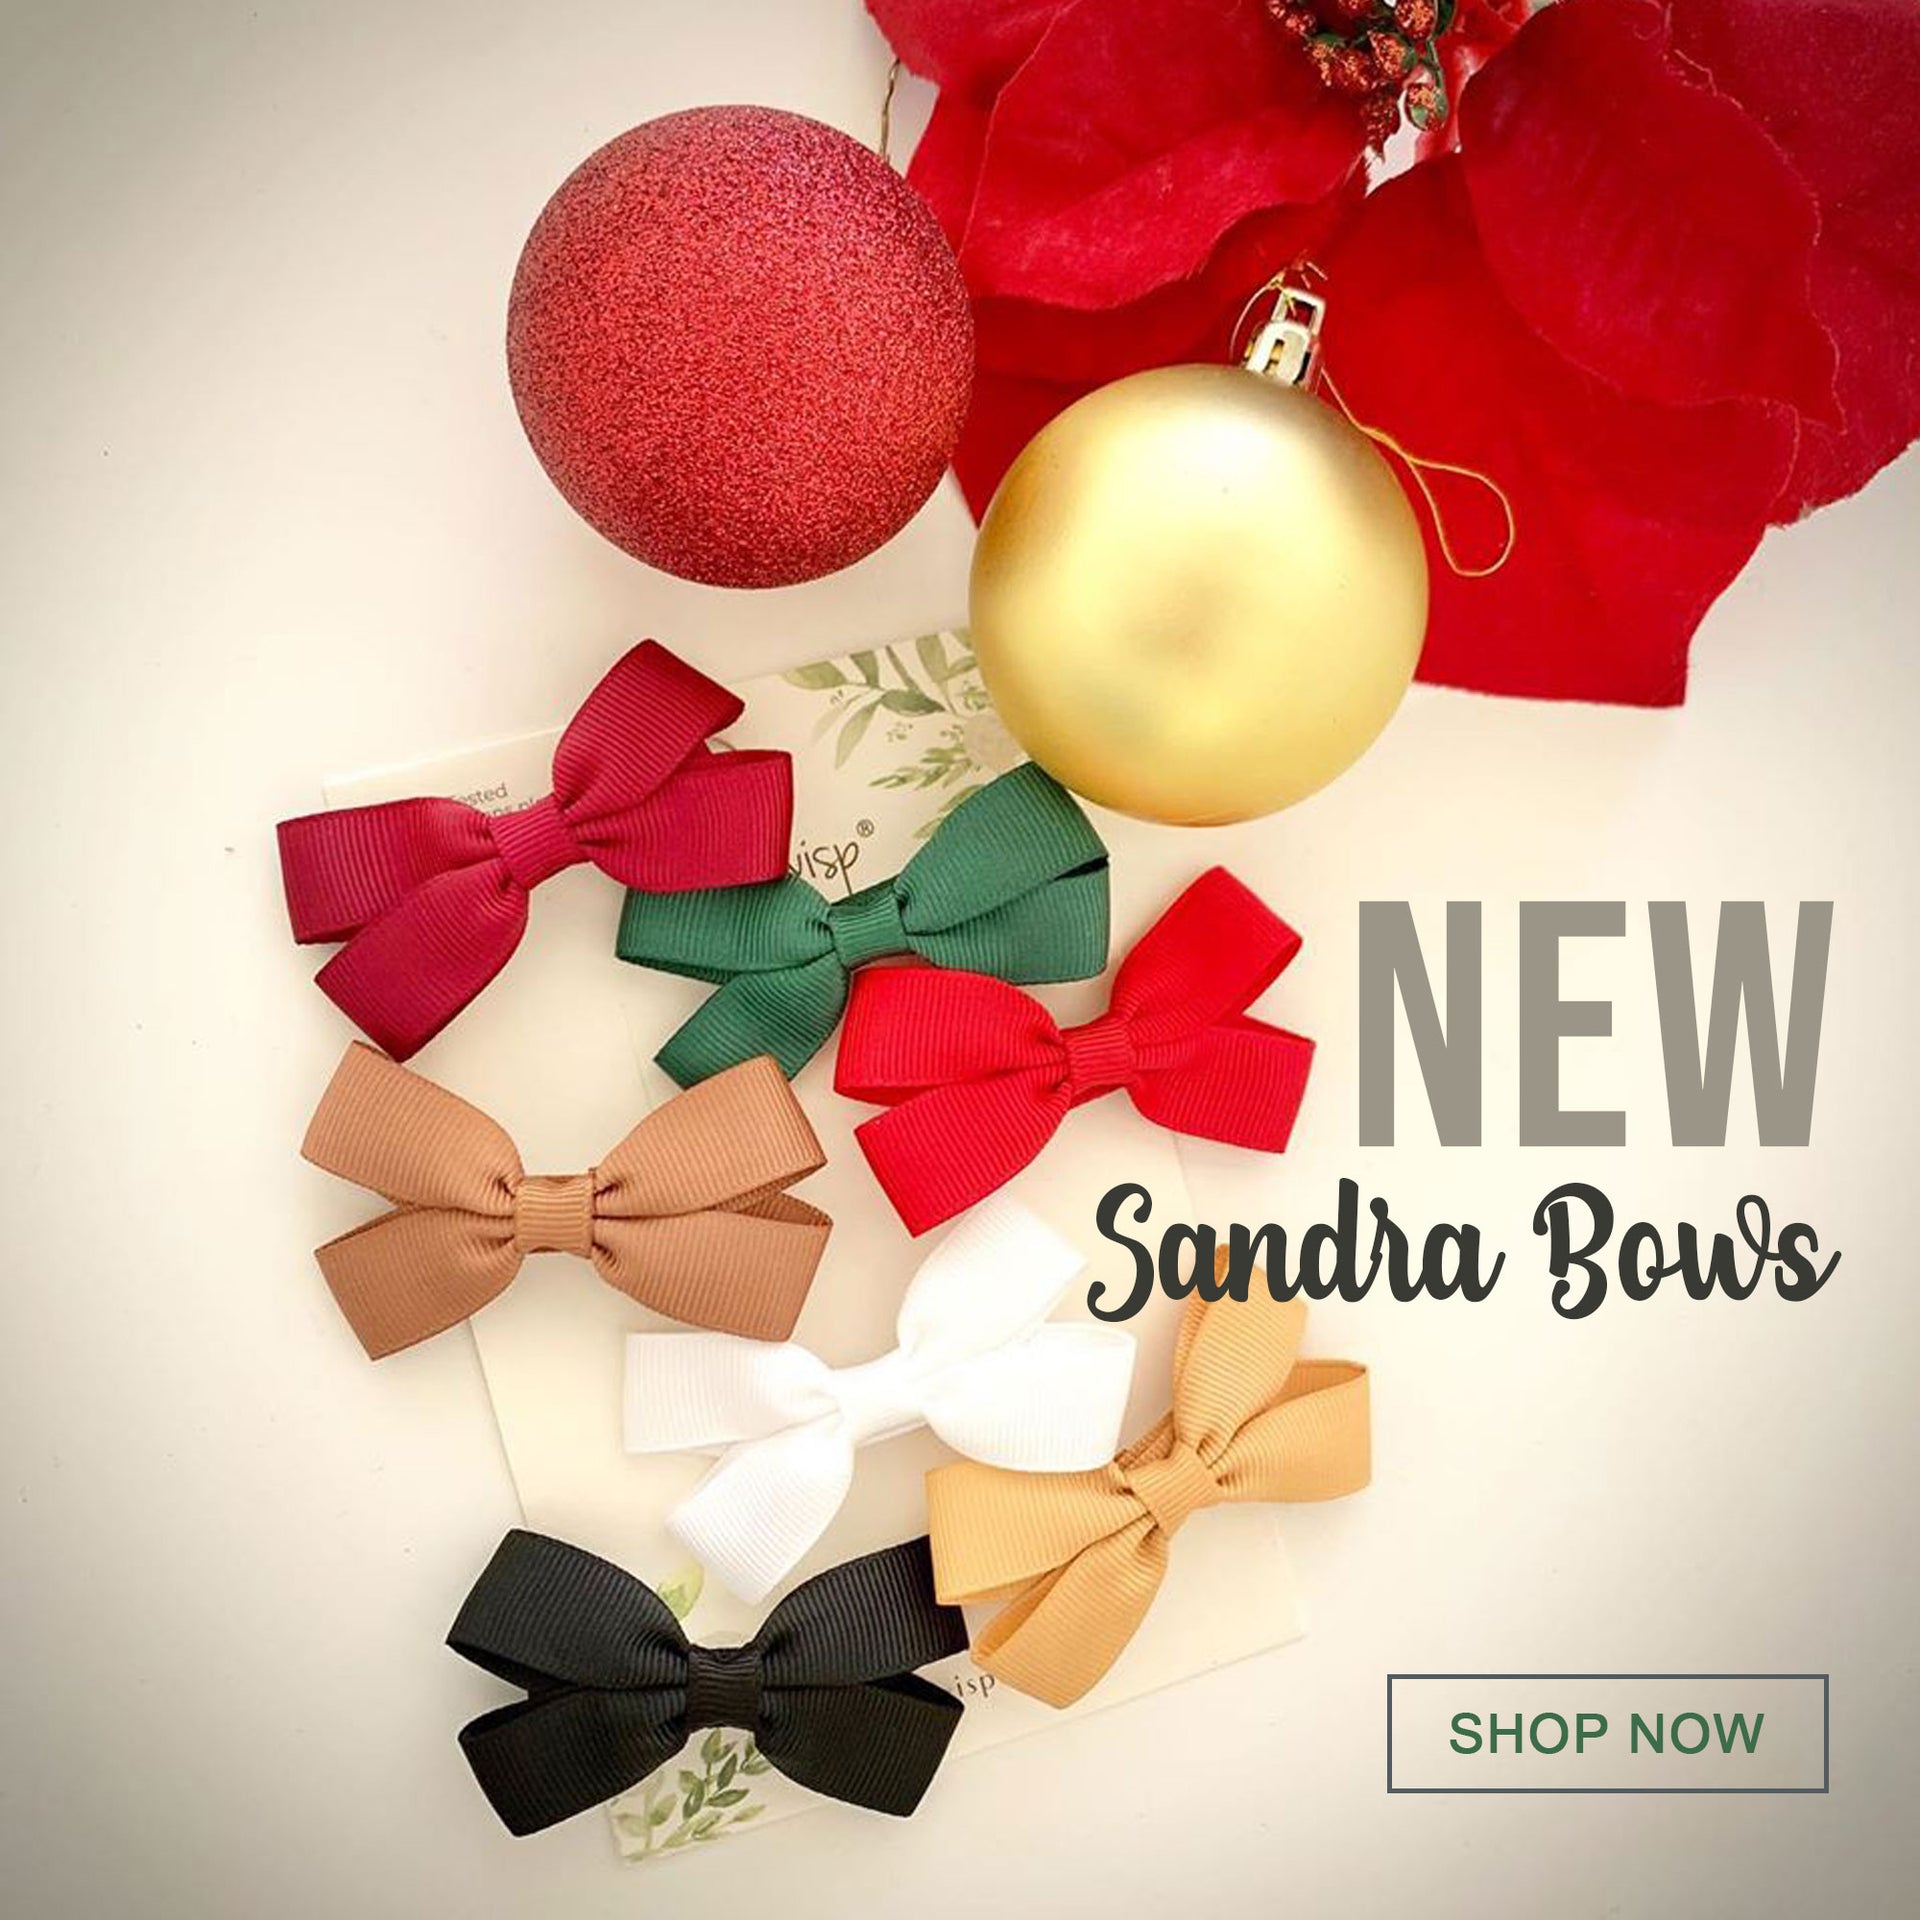 Introducing New Sandra Boutique Bows - perfect for Toddler Pigtails